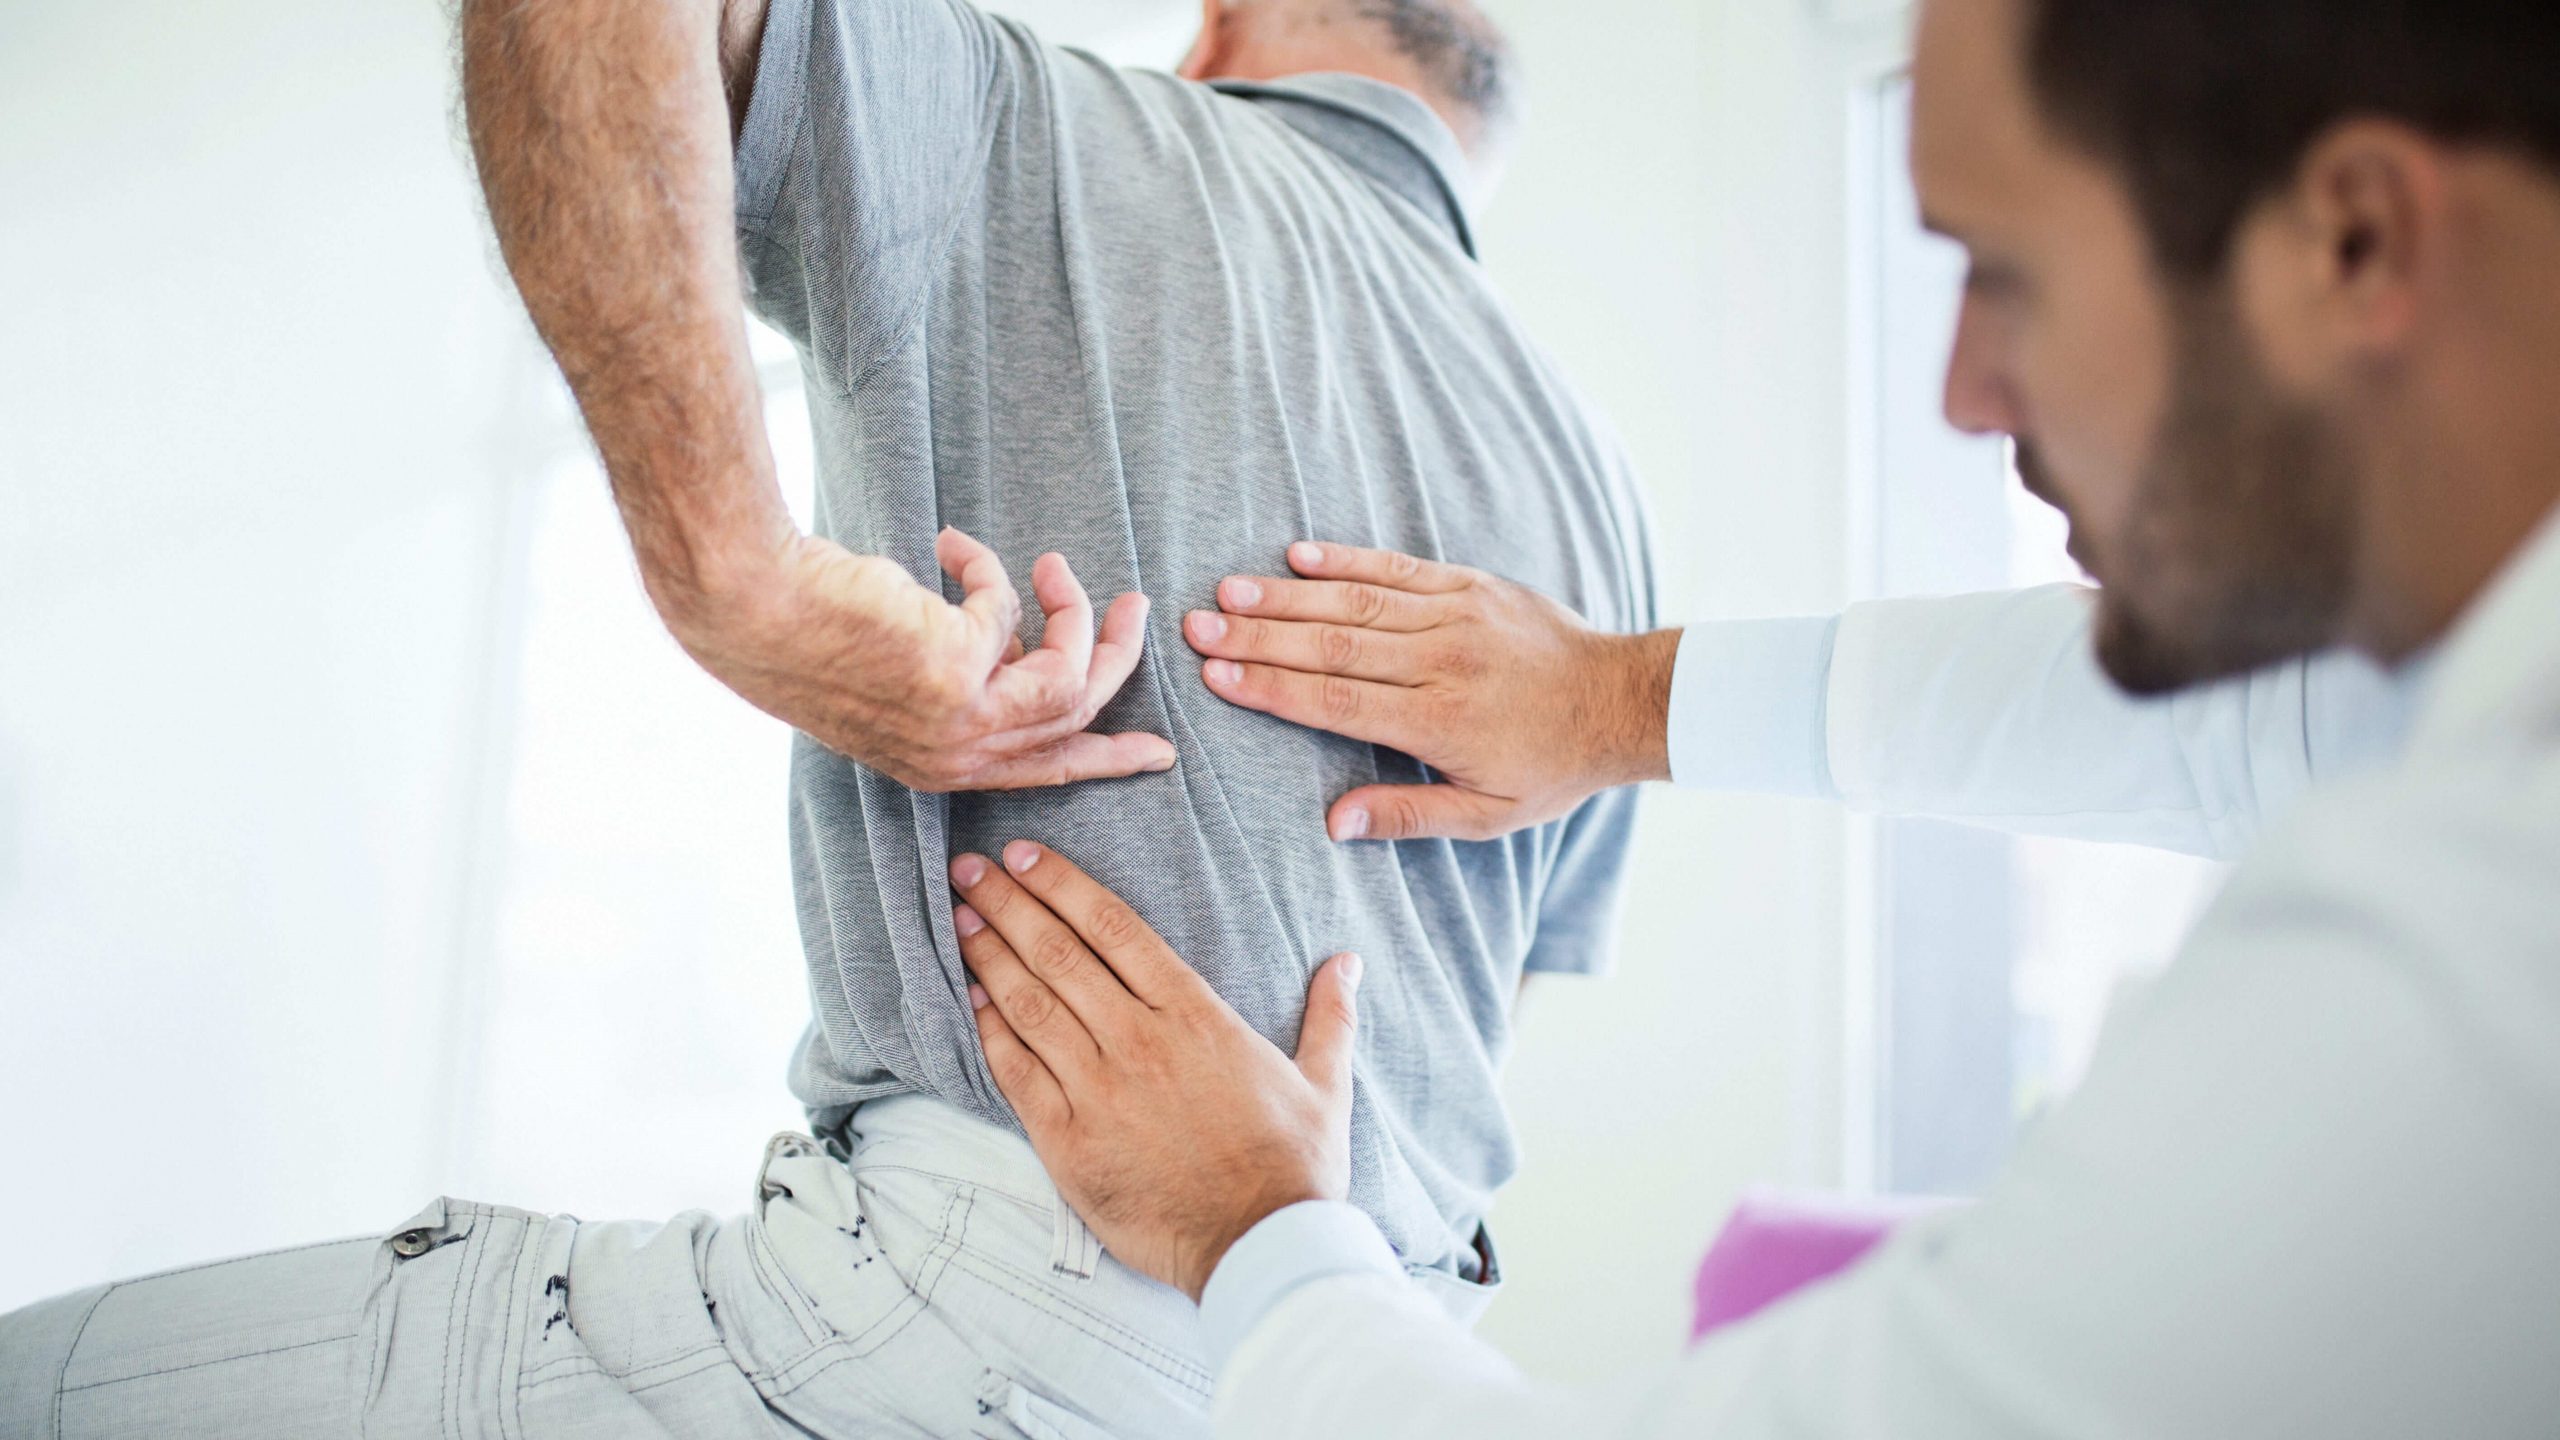 Can Stress Cause Lower Back Pain?